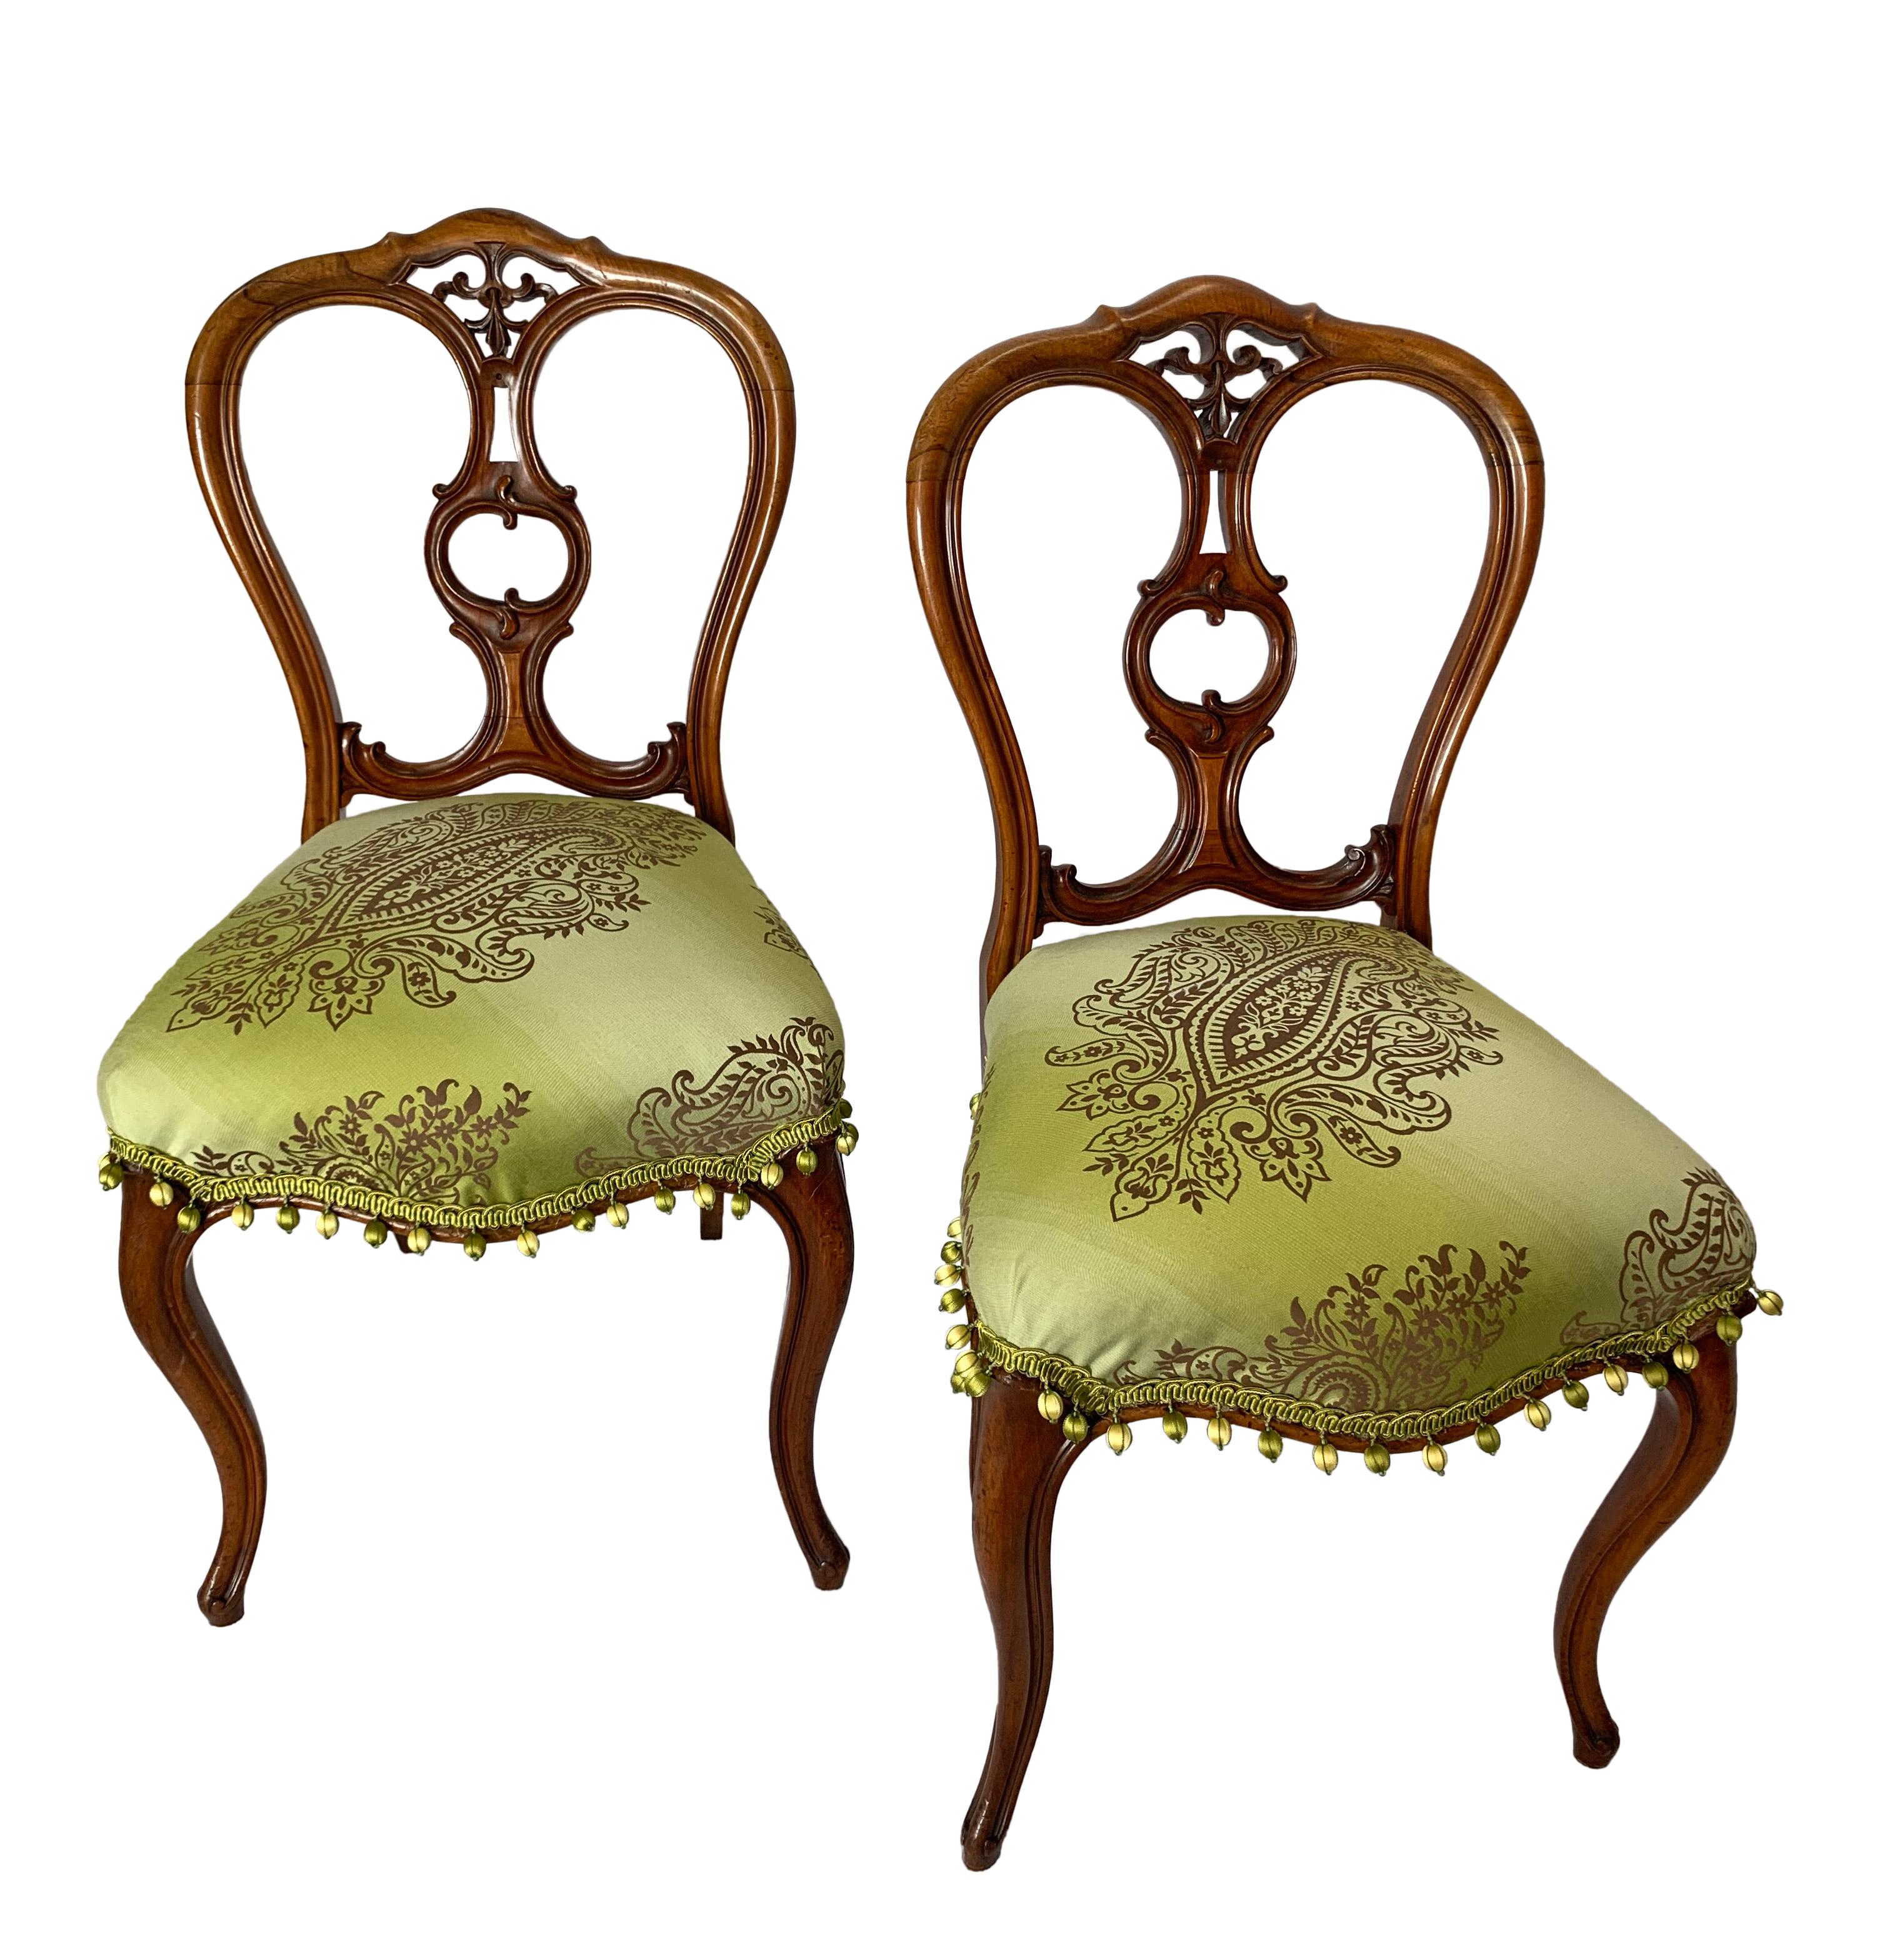 Early 20th Century Petite Victorian Style Elegantly Sculpted Balloon Back Chairs For Sale 1